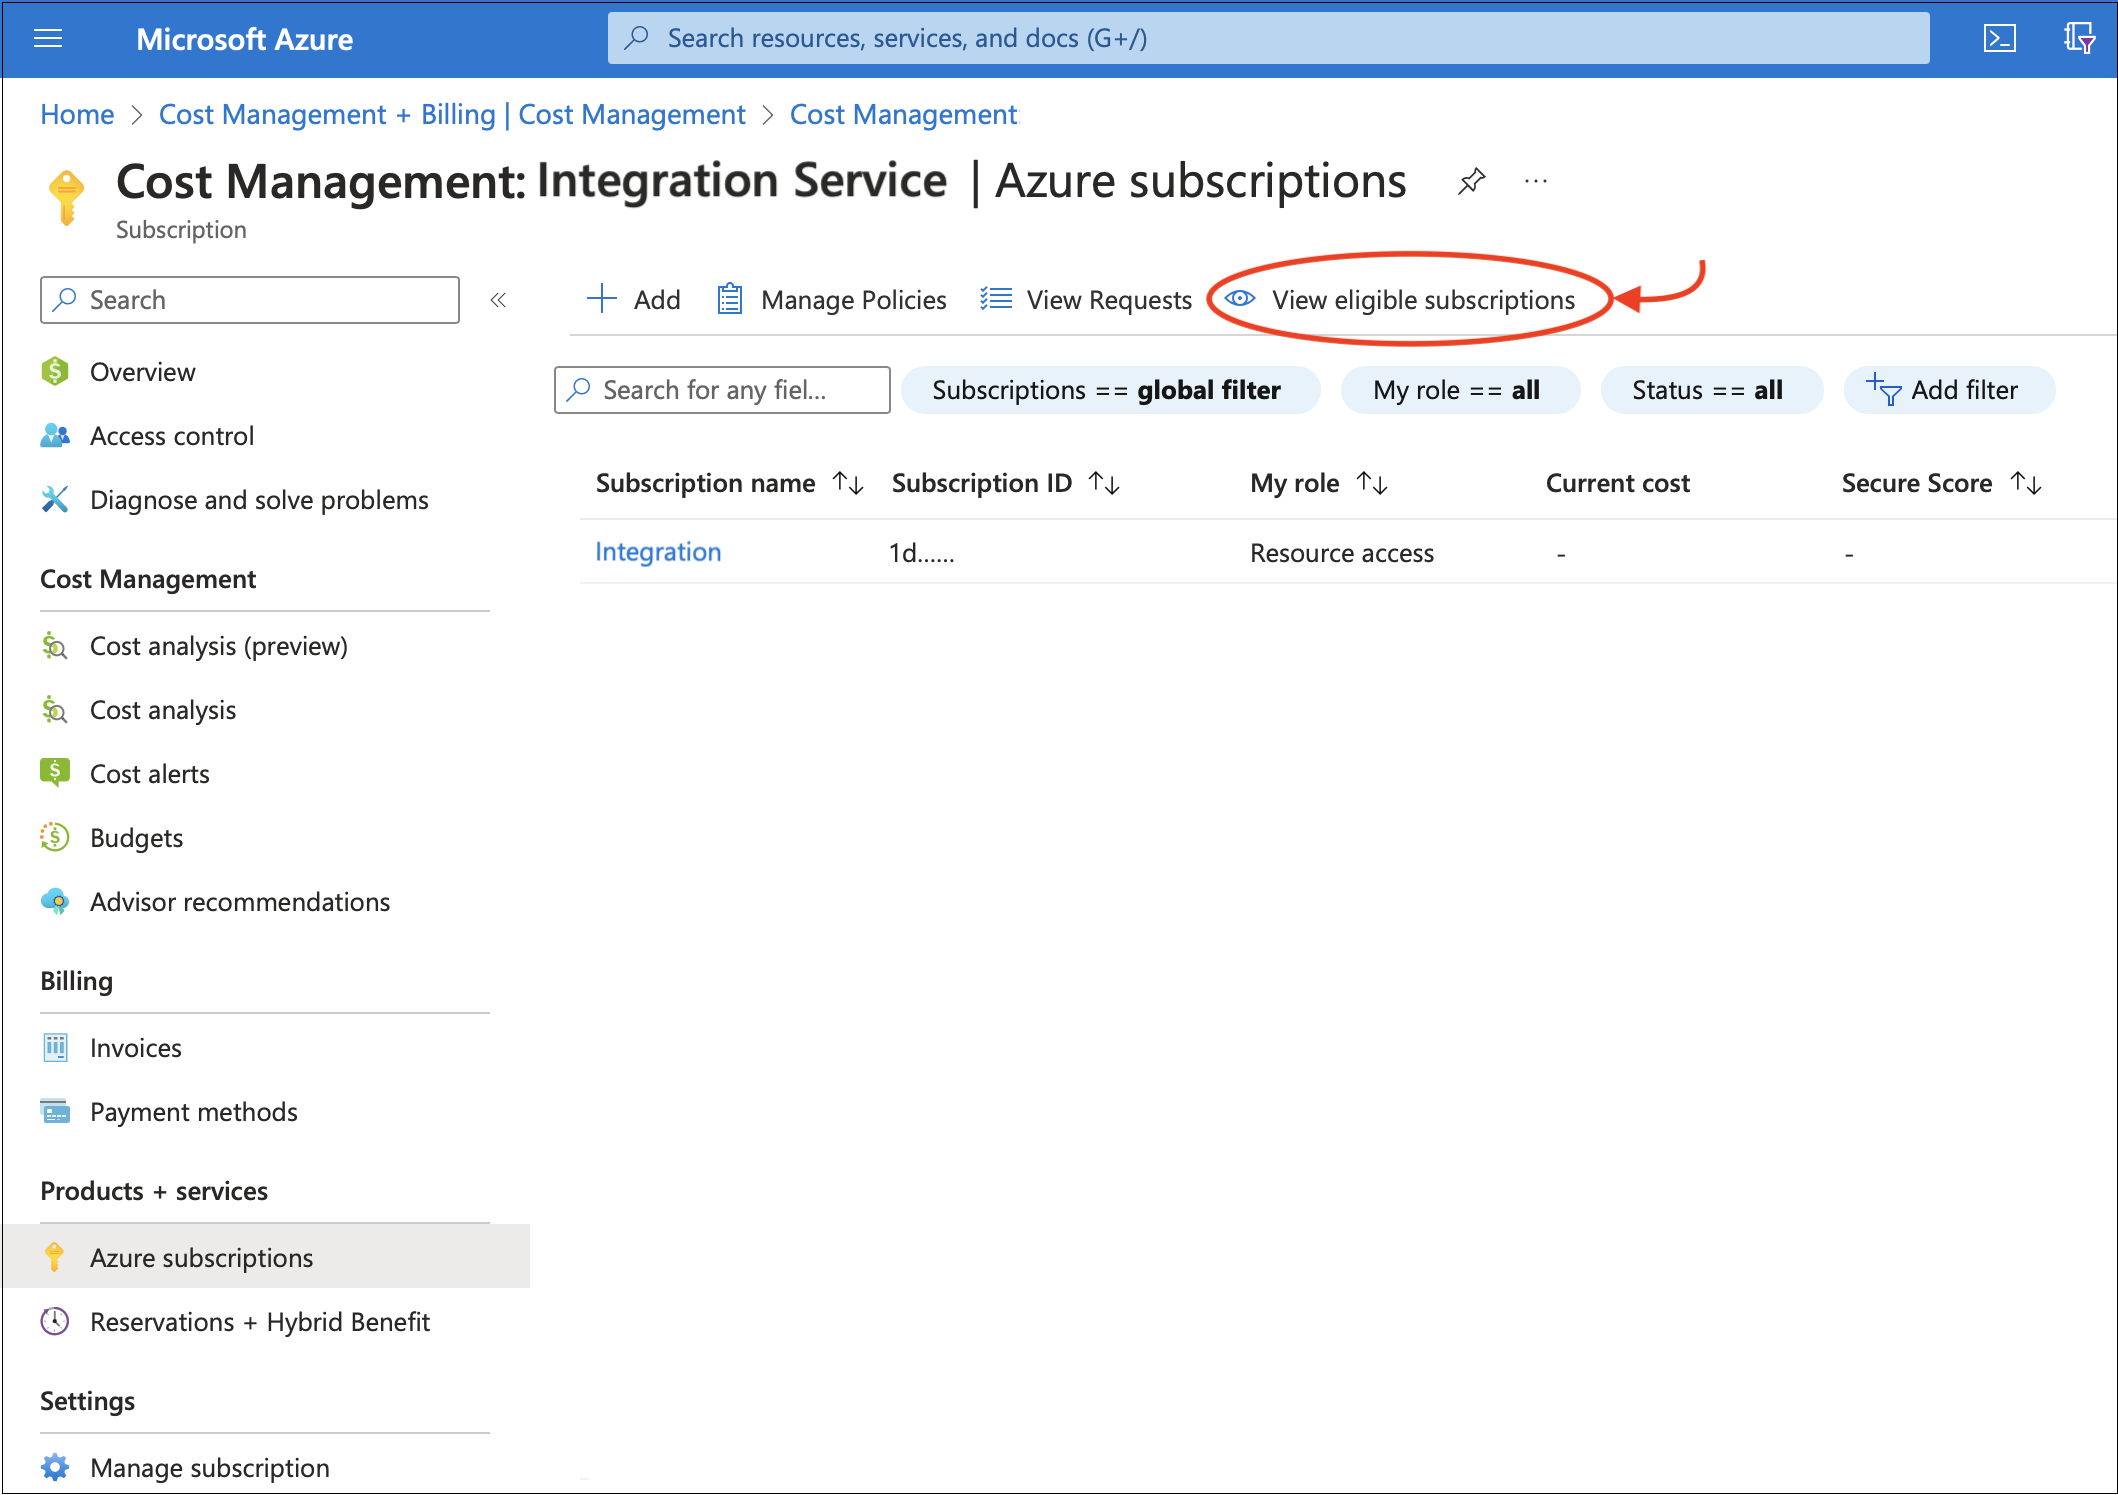 Screenshot of view eligible subscriptions on the Cost Management: Integration Service page.